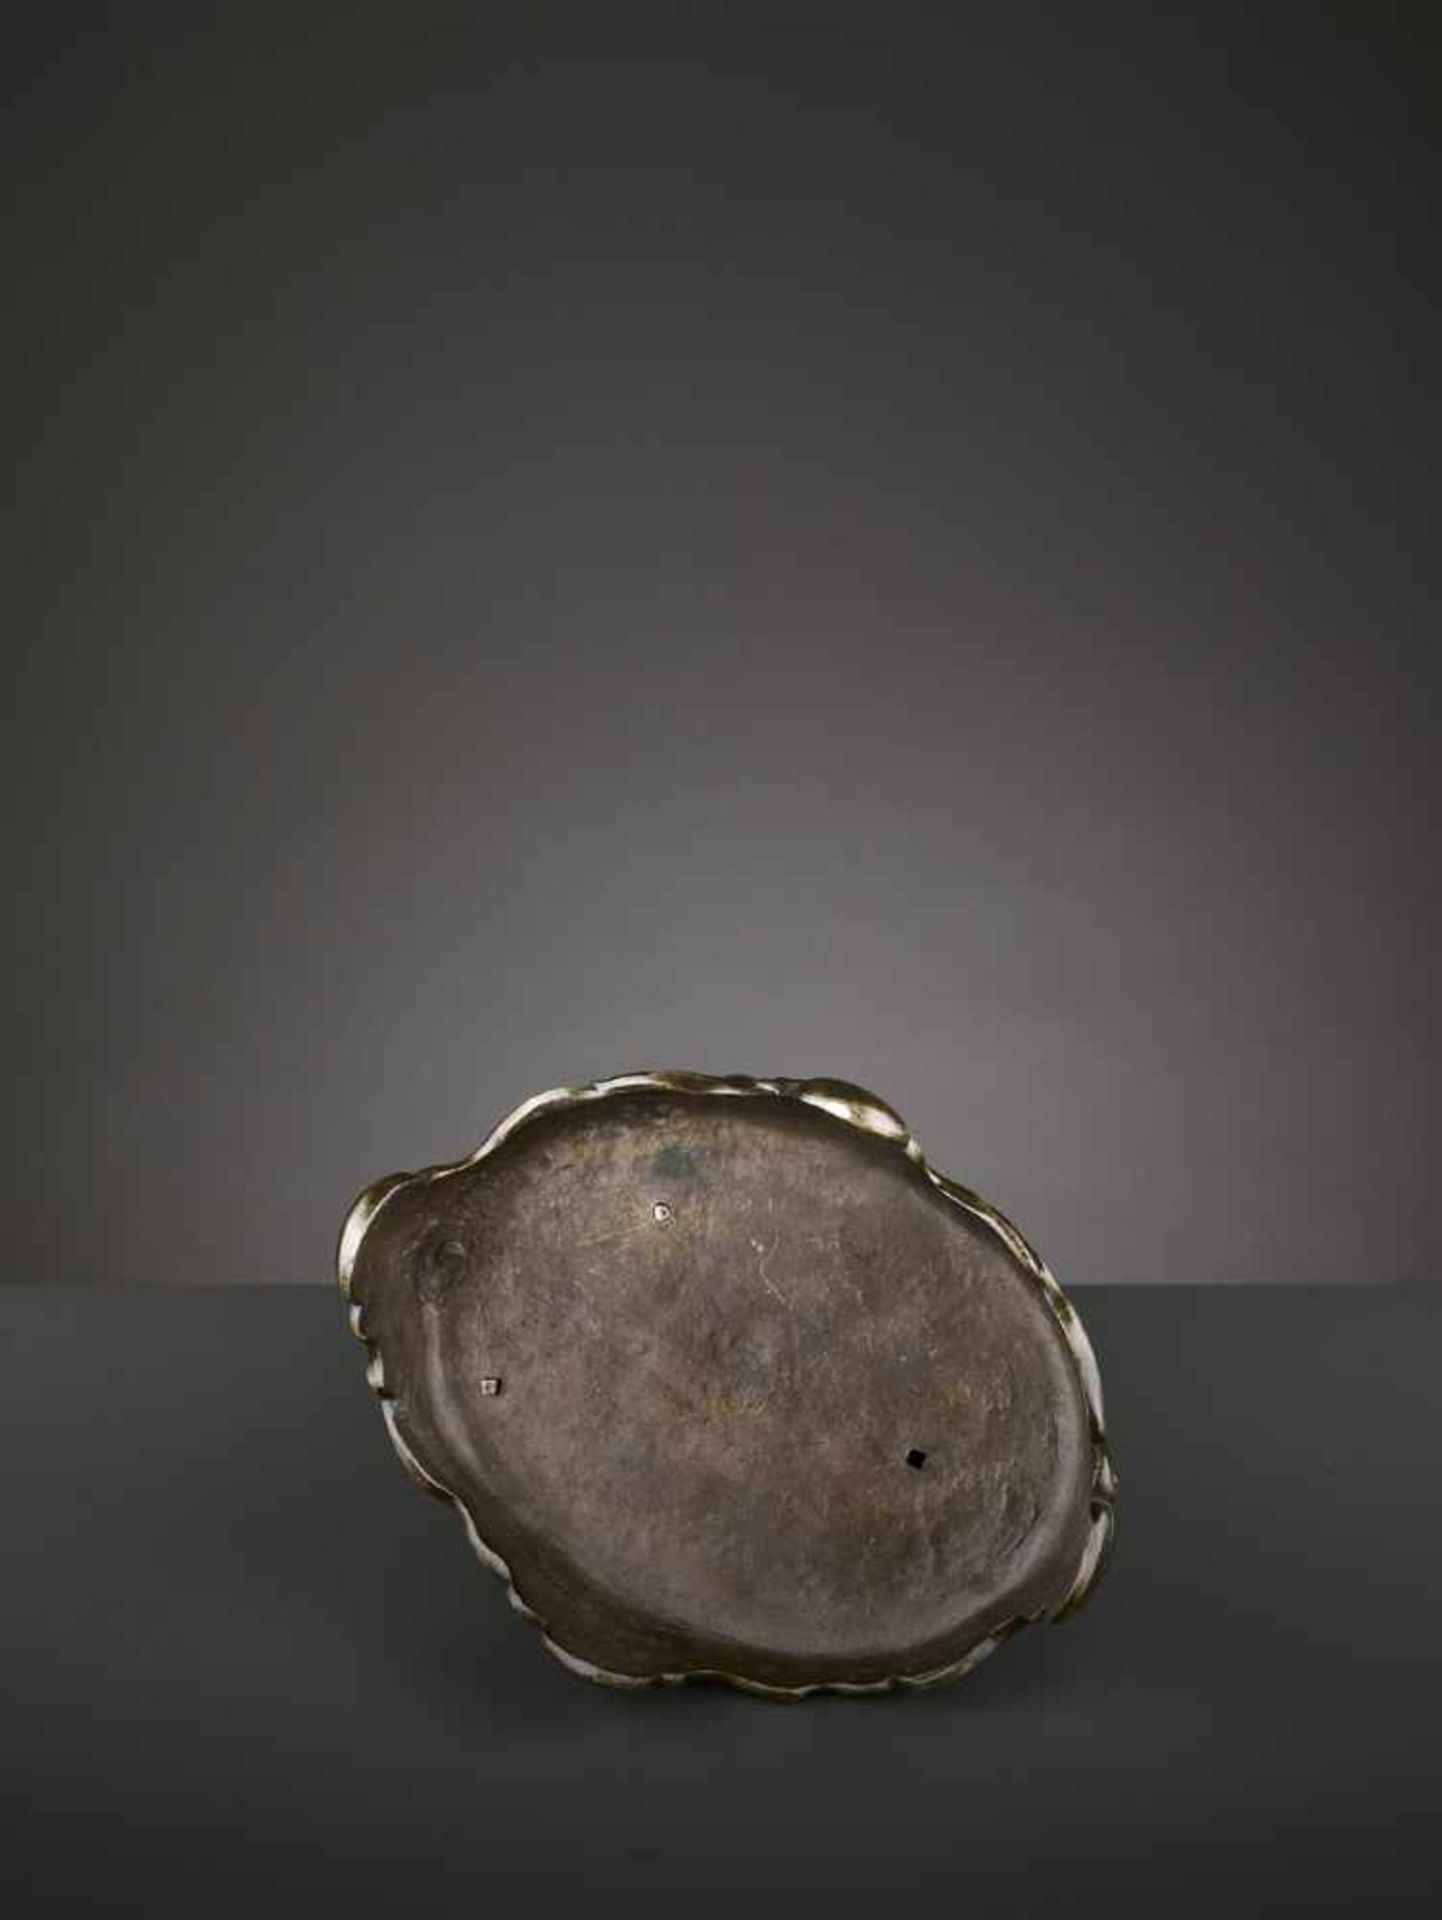 A SILVER- AND GOLD-INLAID BRONZE CENSER, KANGXI China, early 18th century. Heavily cast as a - Image 11 of 12